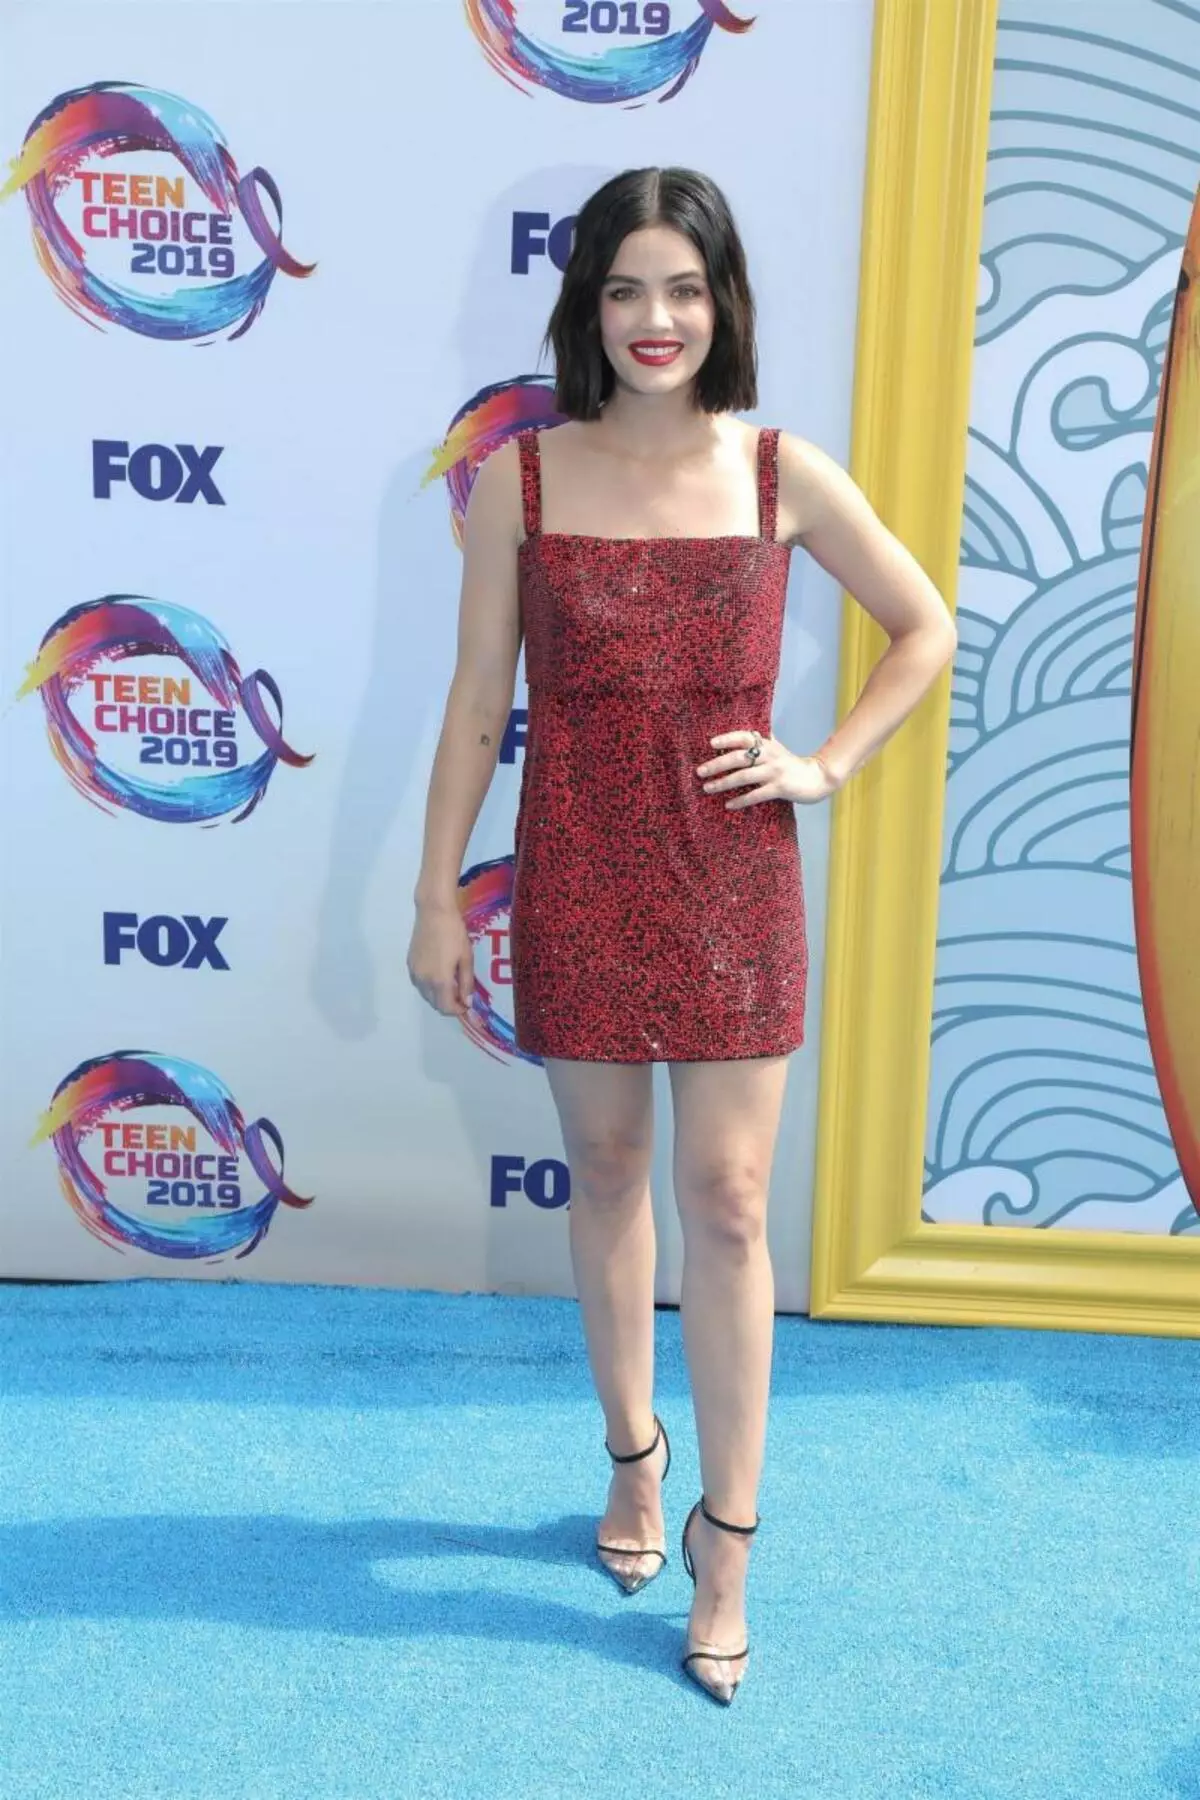 Robert Downey Jr. Jessica Alba, Lucy Hale and others on Teen Choice Awards 2019 30845_7